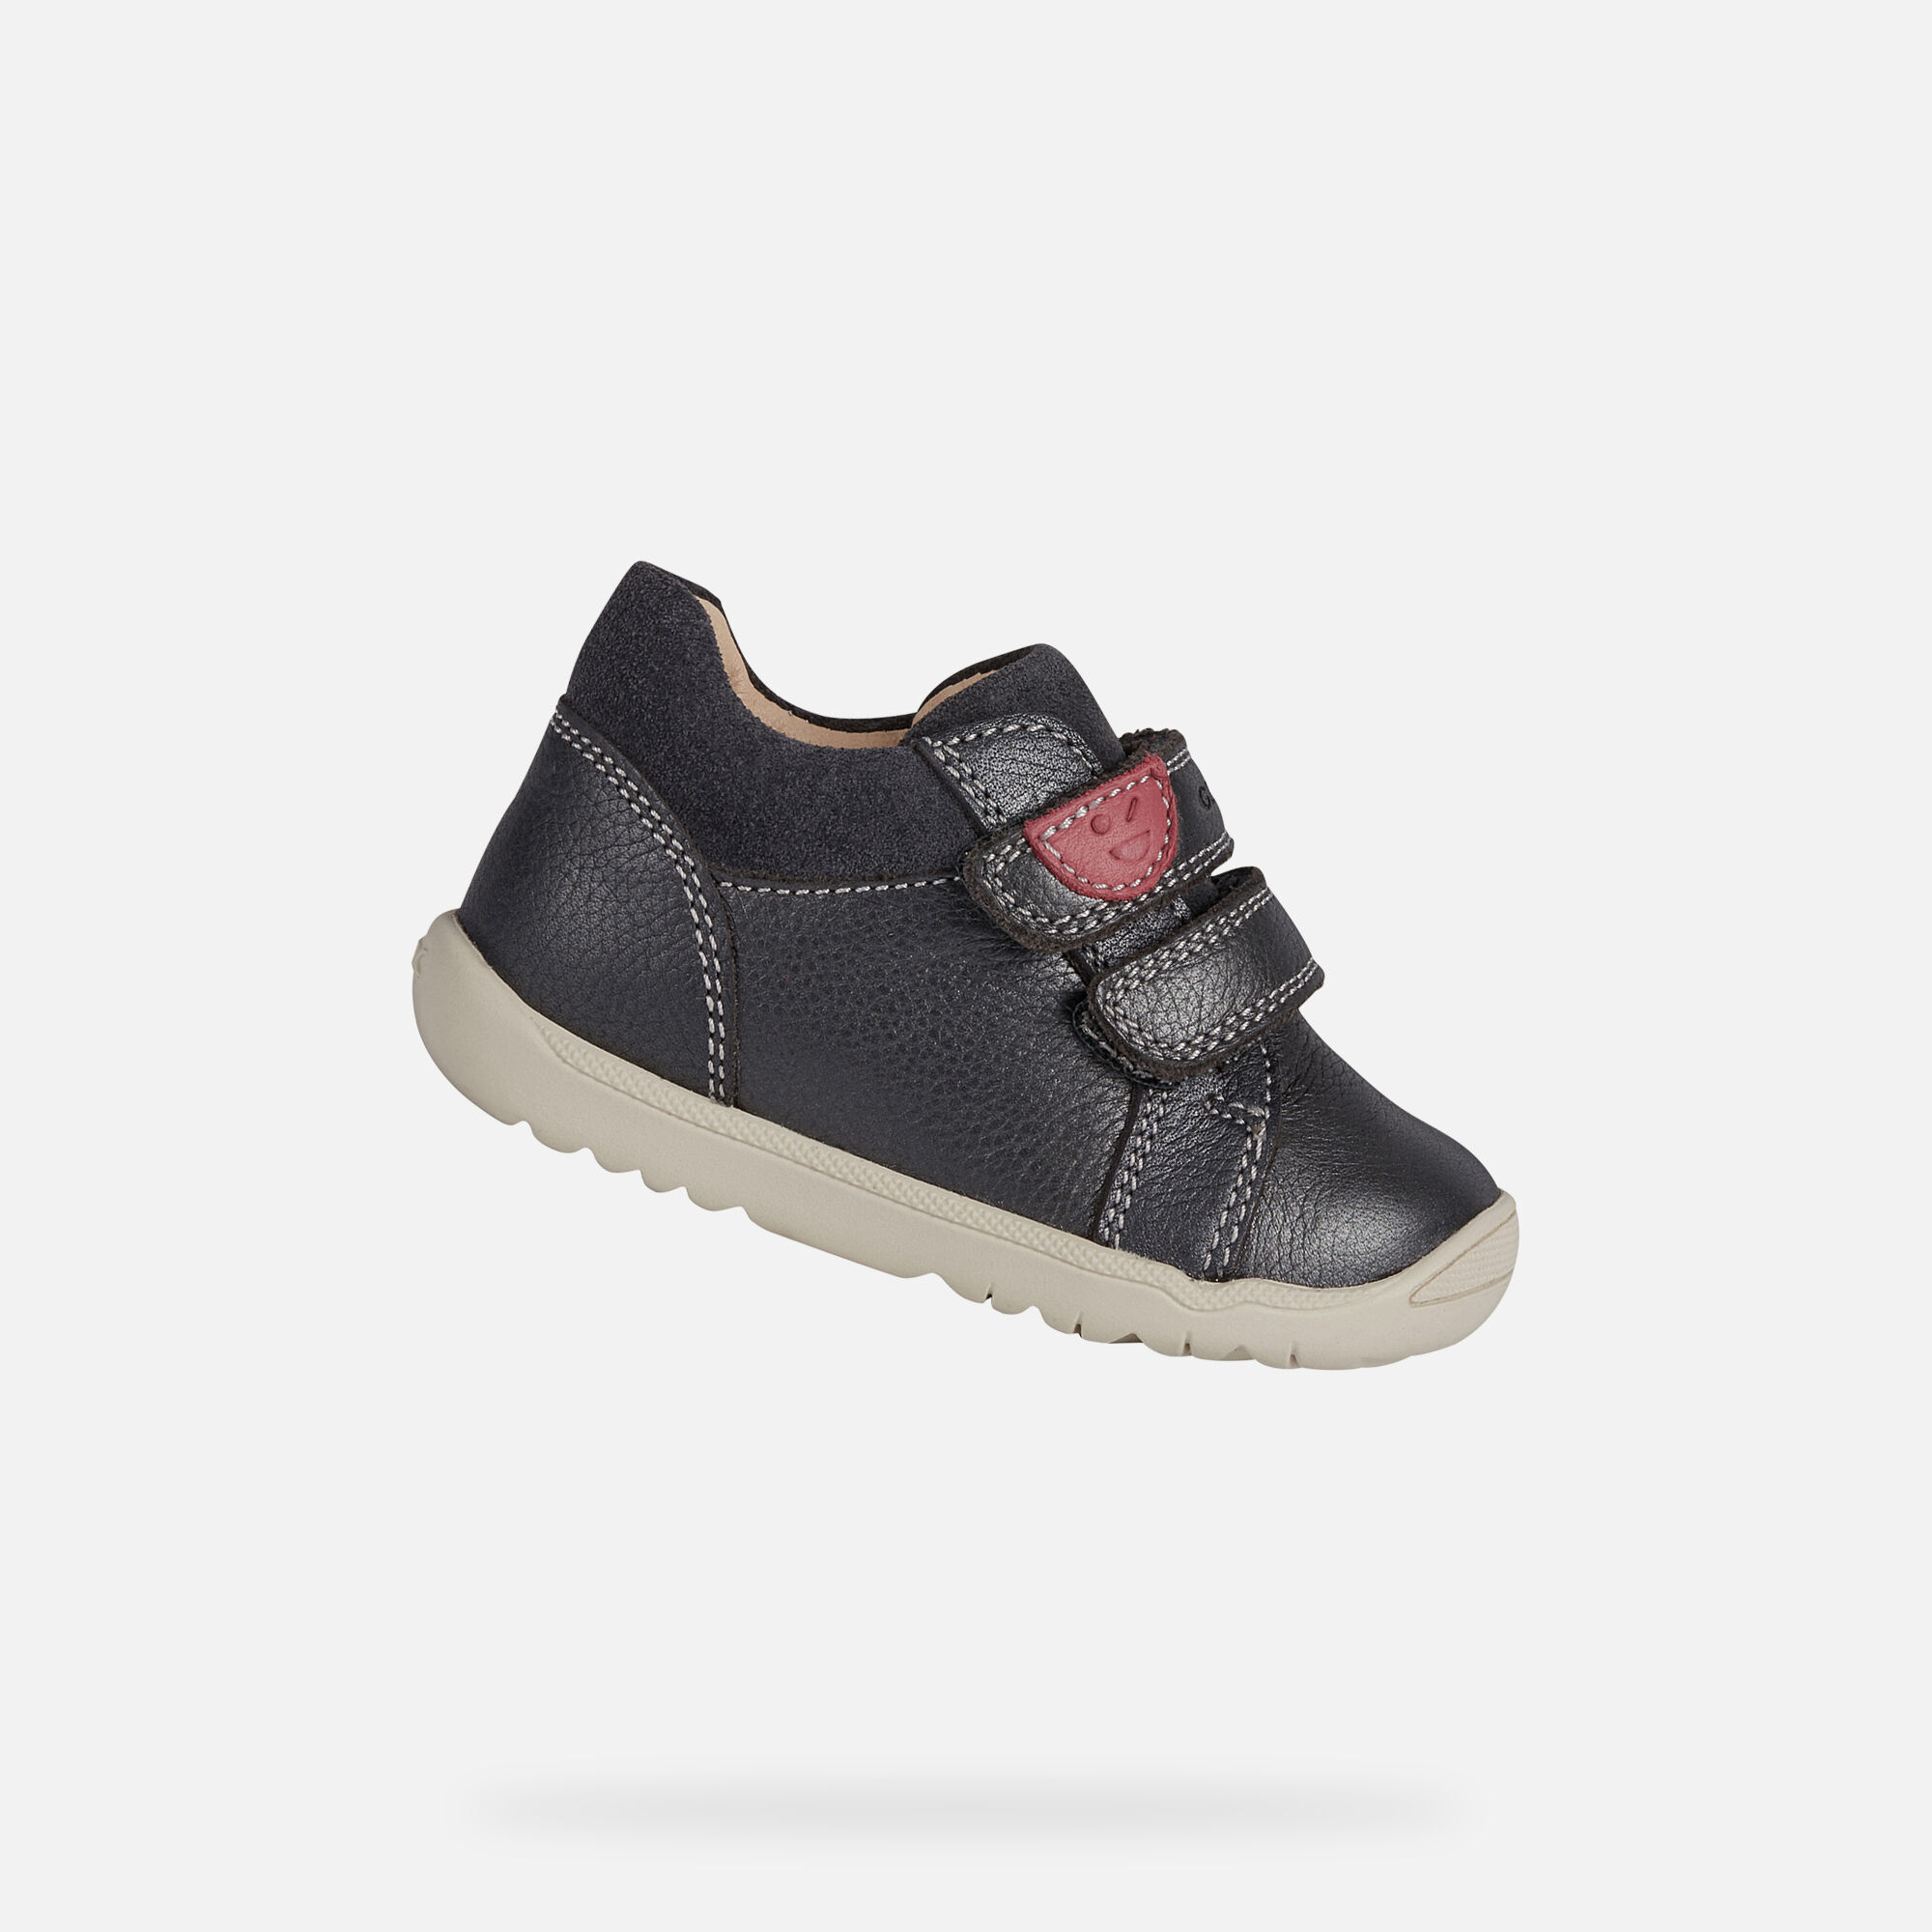 geox infant shoes